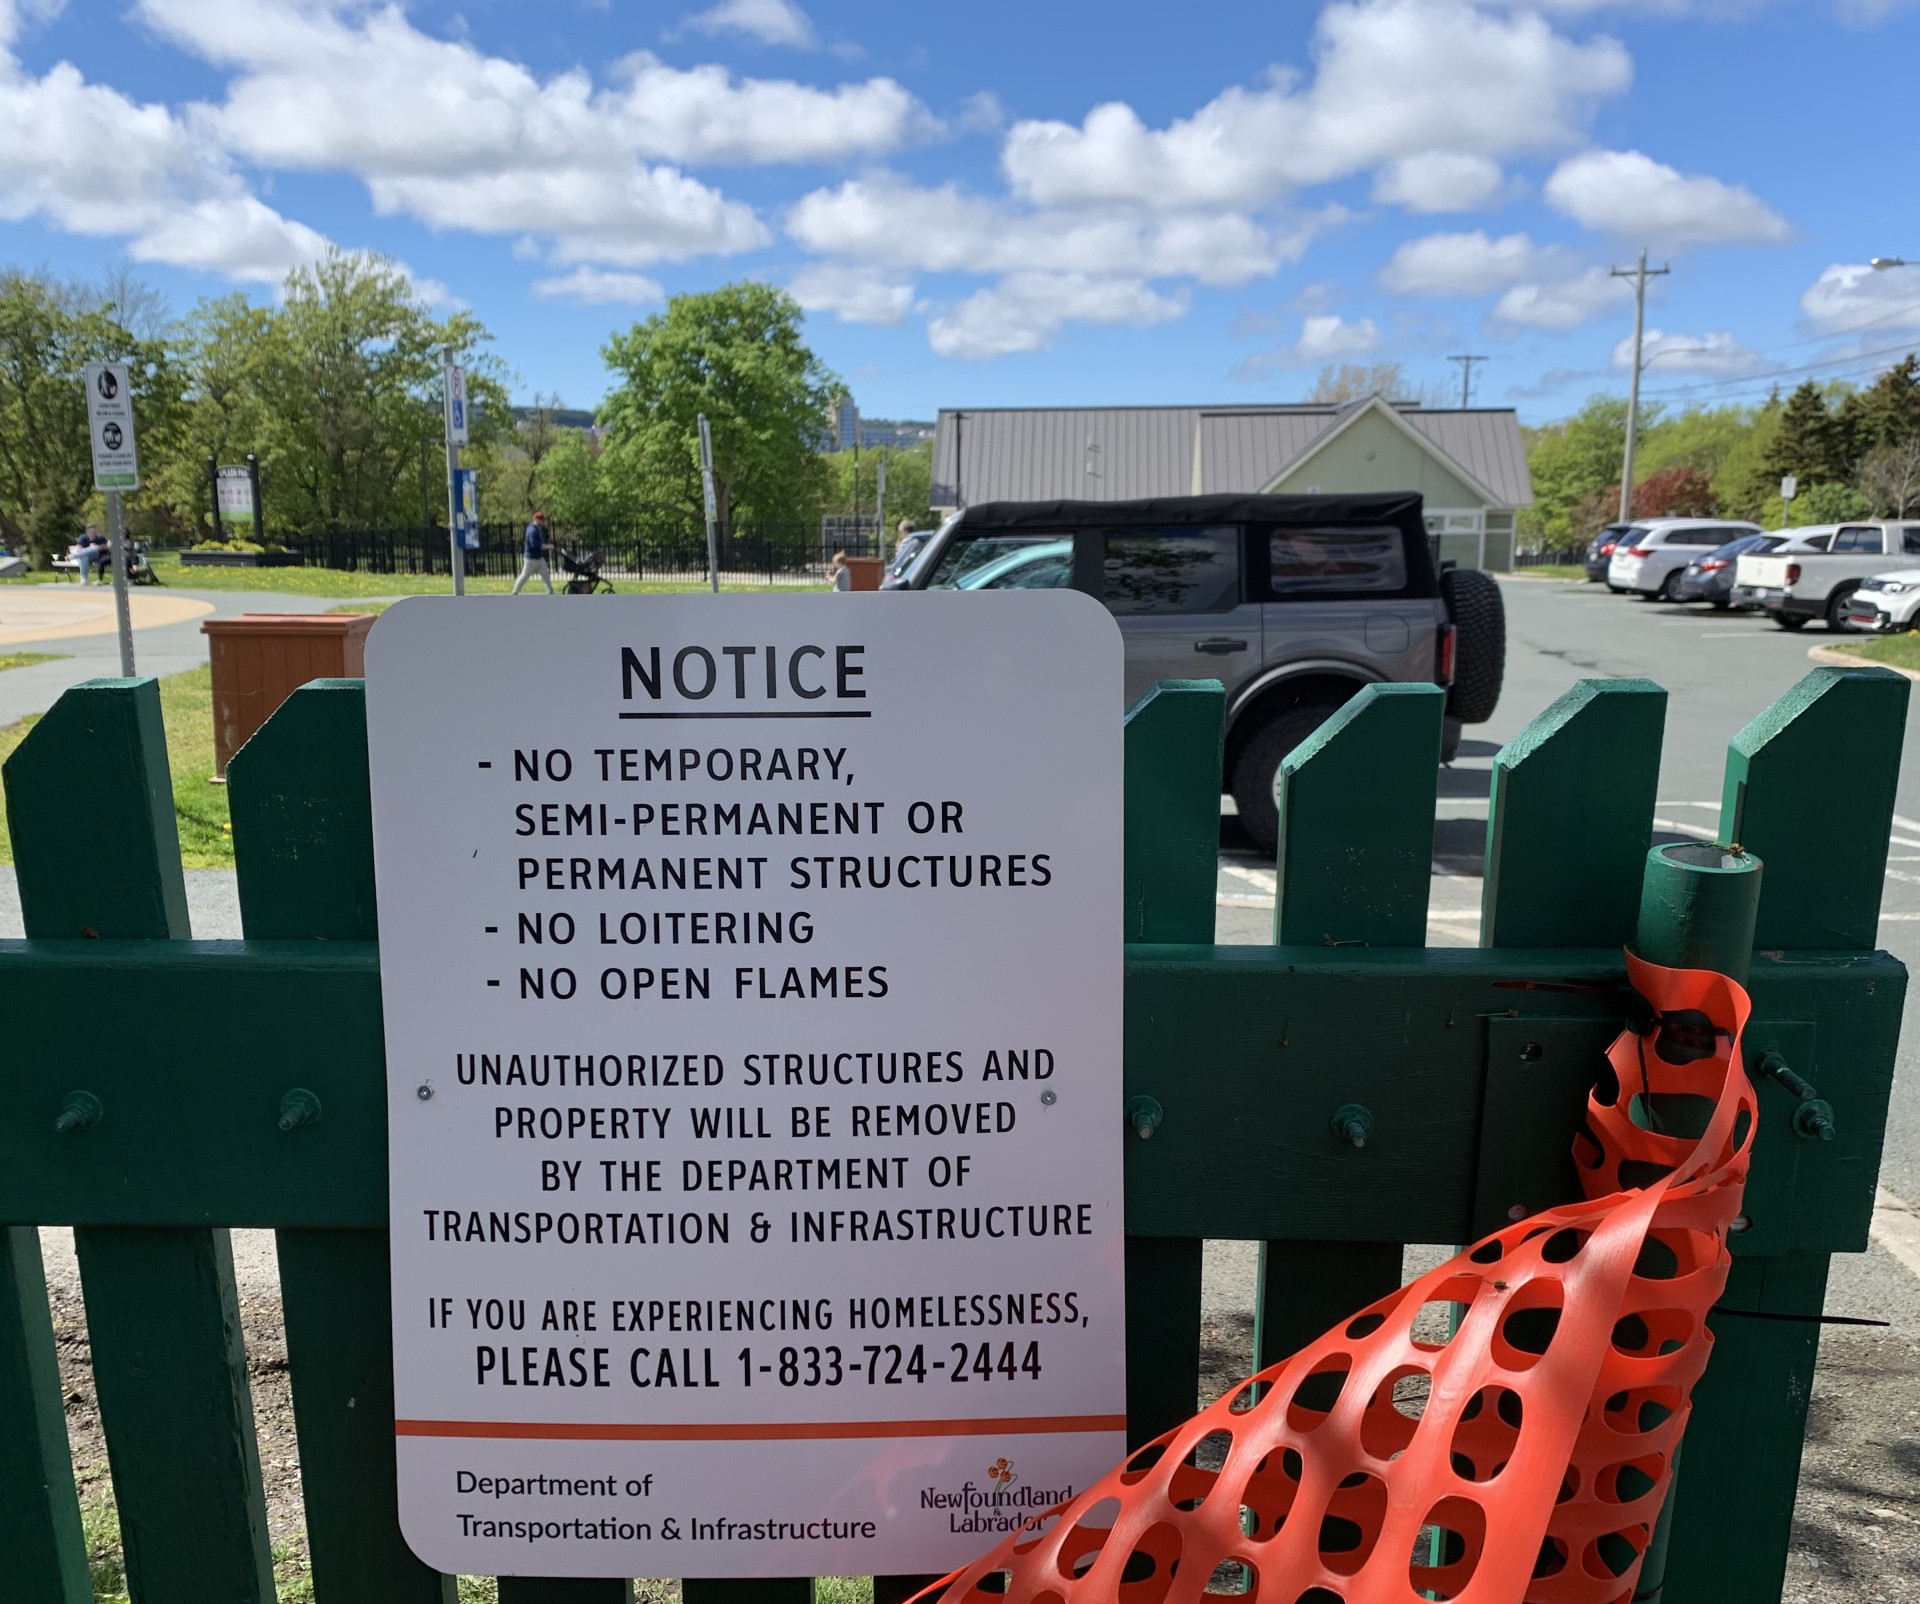 A sign on a fence between the Colonial Building and Bannerman Park reads "No temporary, semi-permanent or permanent structures, no loitering, no open flames. Unauthorized structures and property will be removed by the Department of Transportation and Infrastructure. If you are experiencing homelessness, please call 1-833-724-2444.